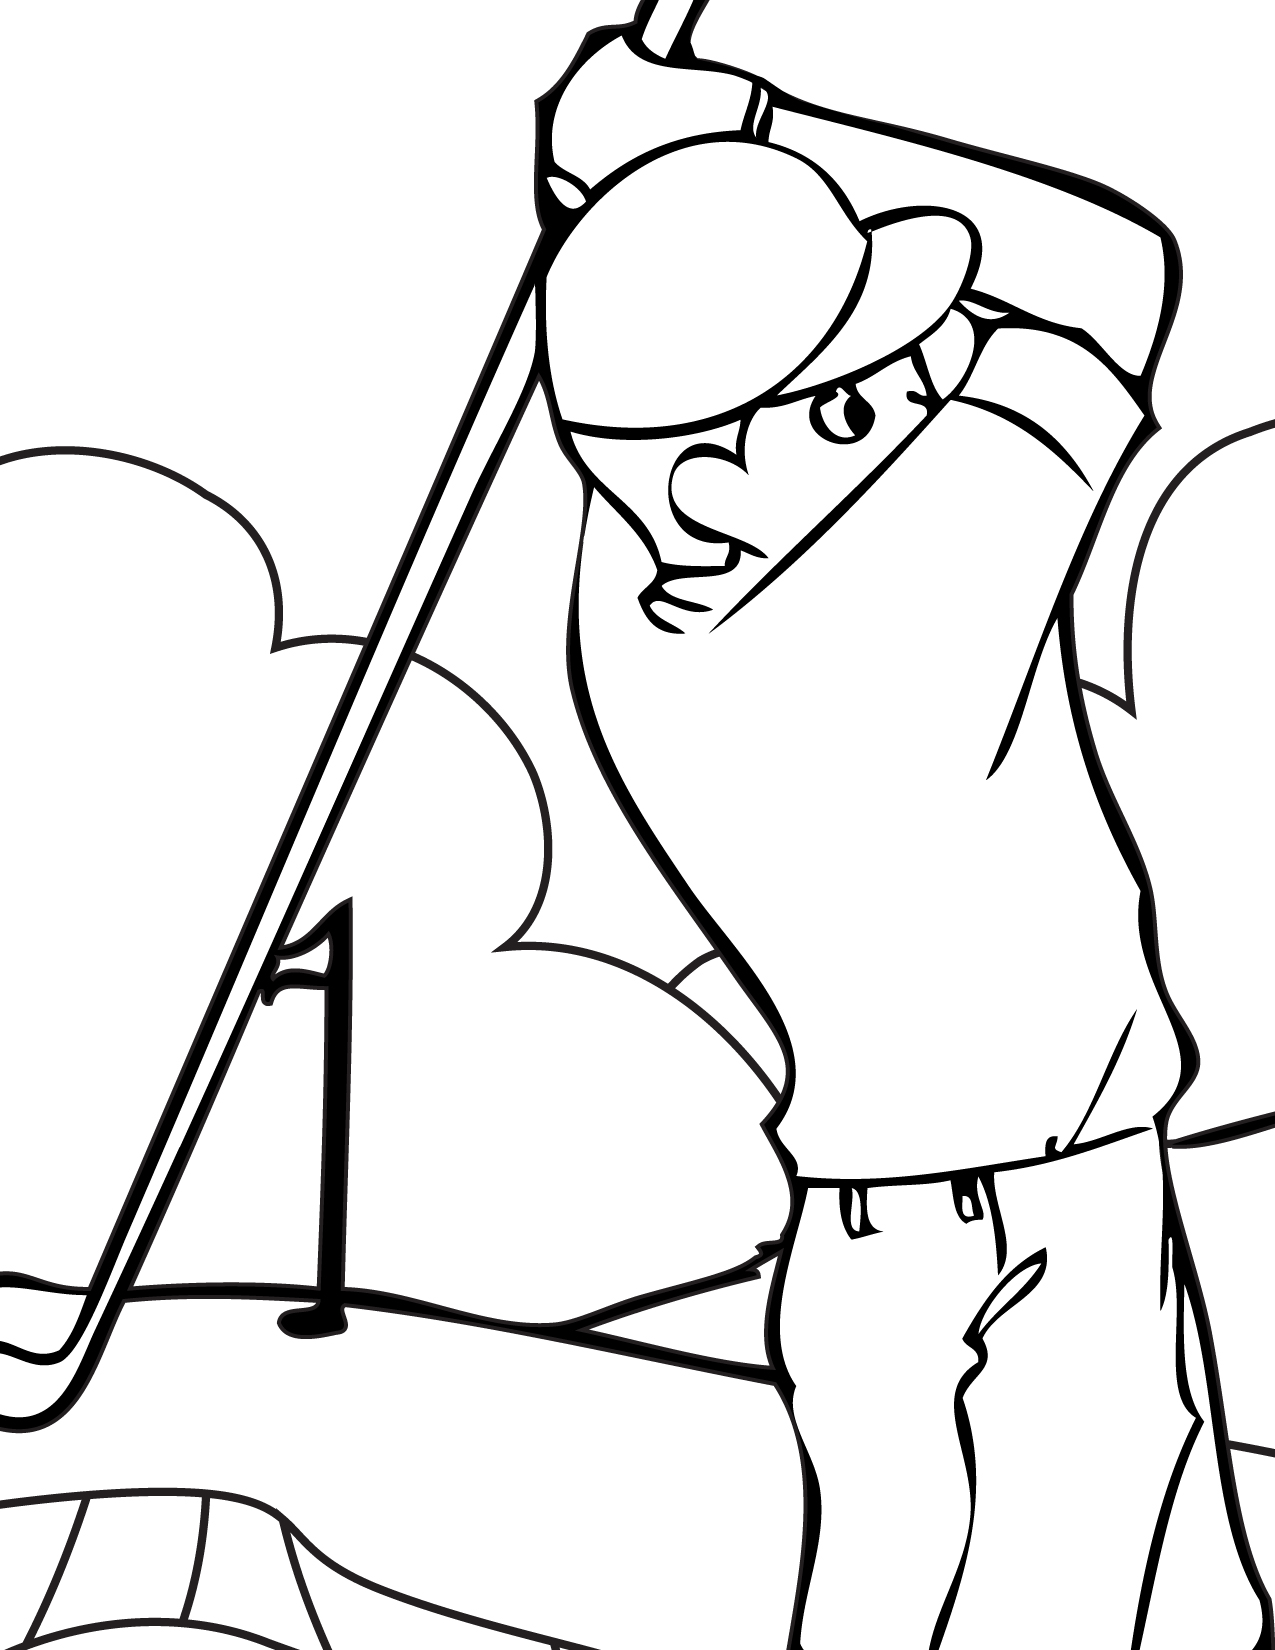 Golf coloring pages to download and print for free